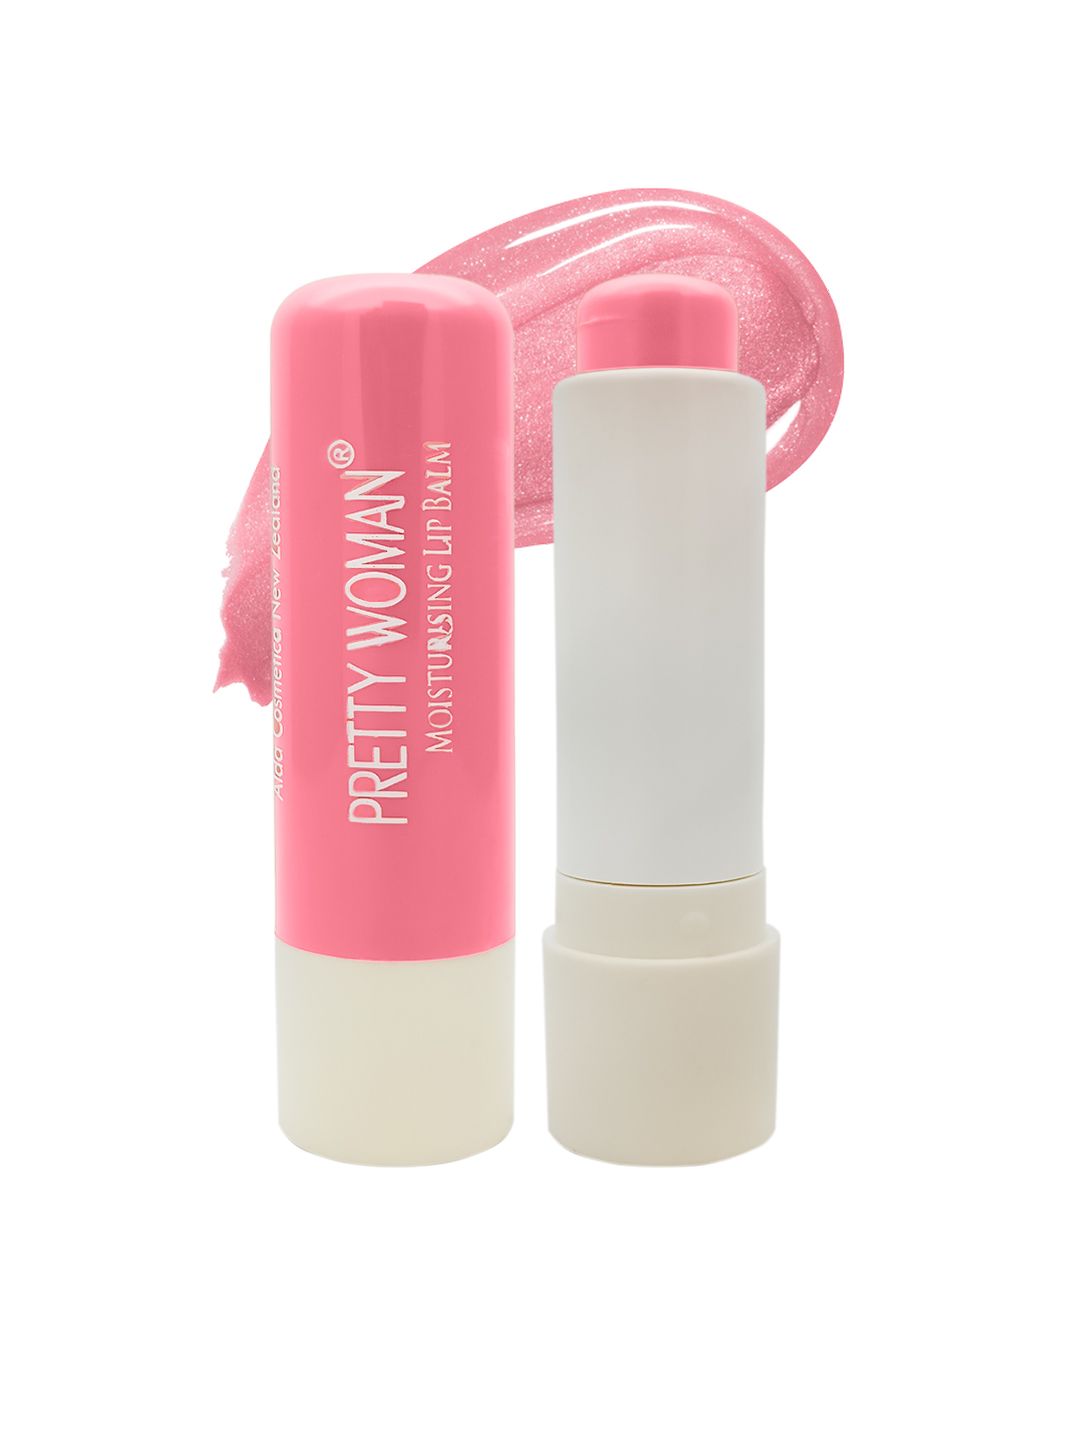 Pretty Woman Moisturizing Rose Tinted Lip Balm for Dry & Chapped Lips Price in India